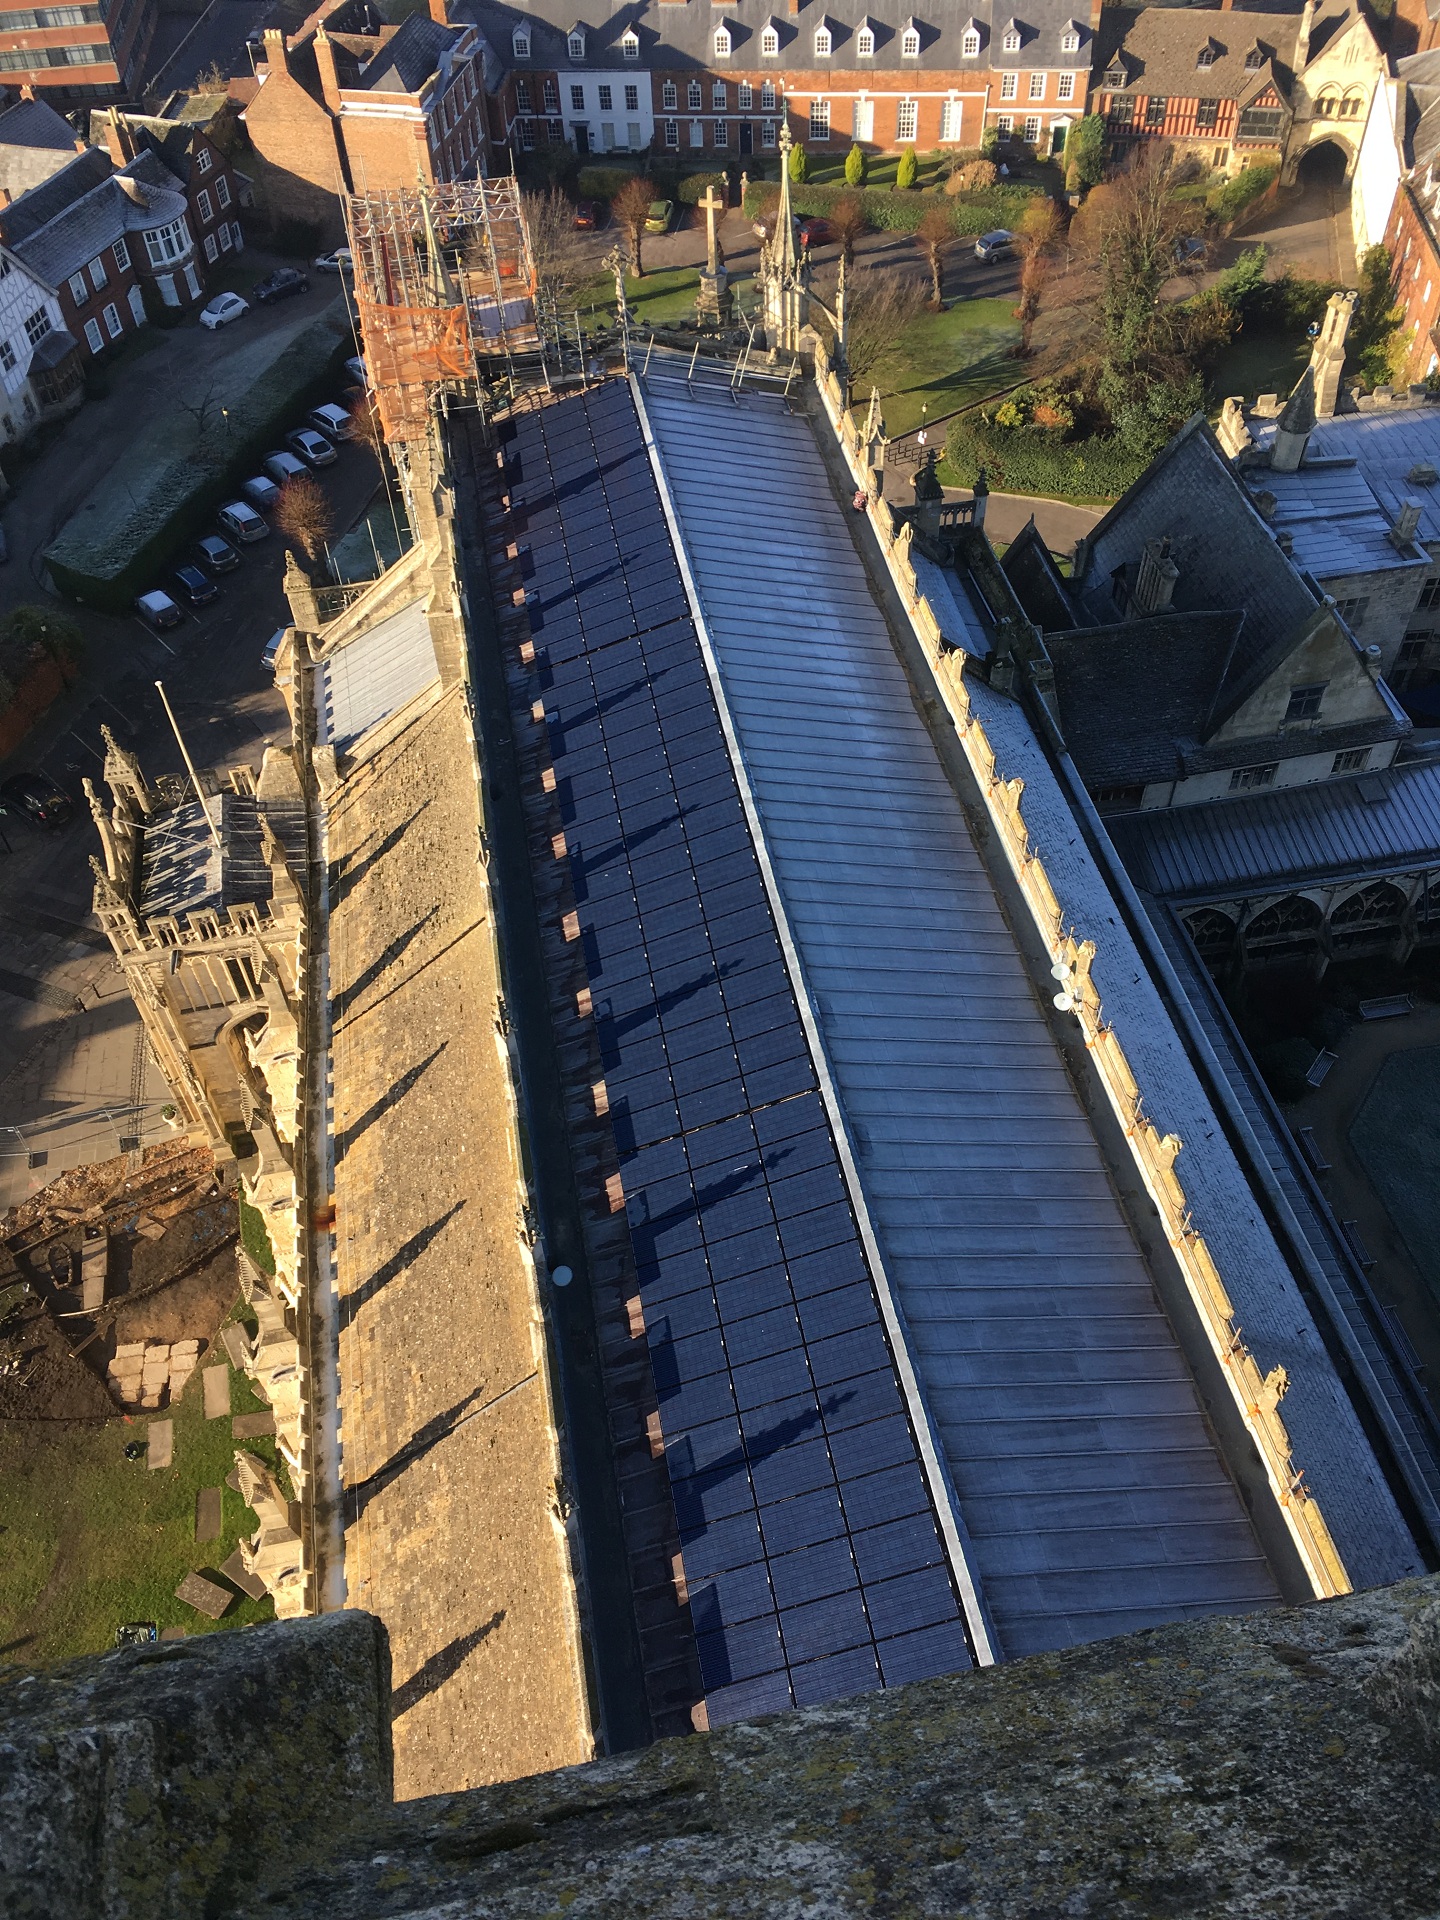 A view along the roof of the nave of Gloucester Cathedral showing the solar panels.